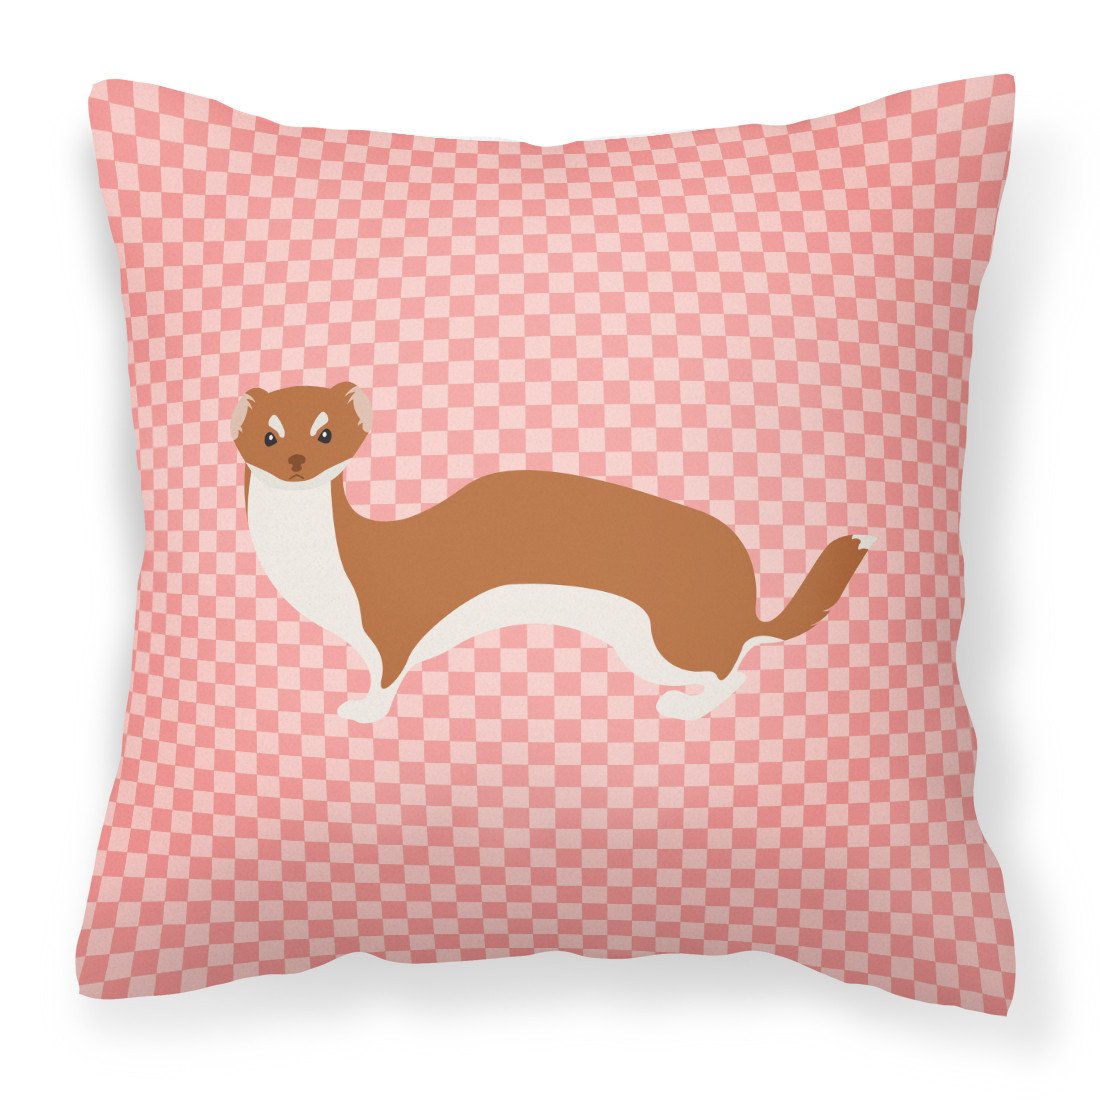 Weasel Pink Check Fabric Decorative Pillow BB7870PW1818 by Caroline's Treasures